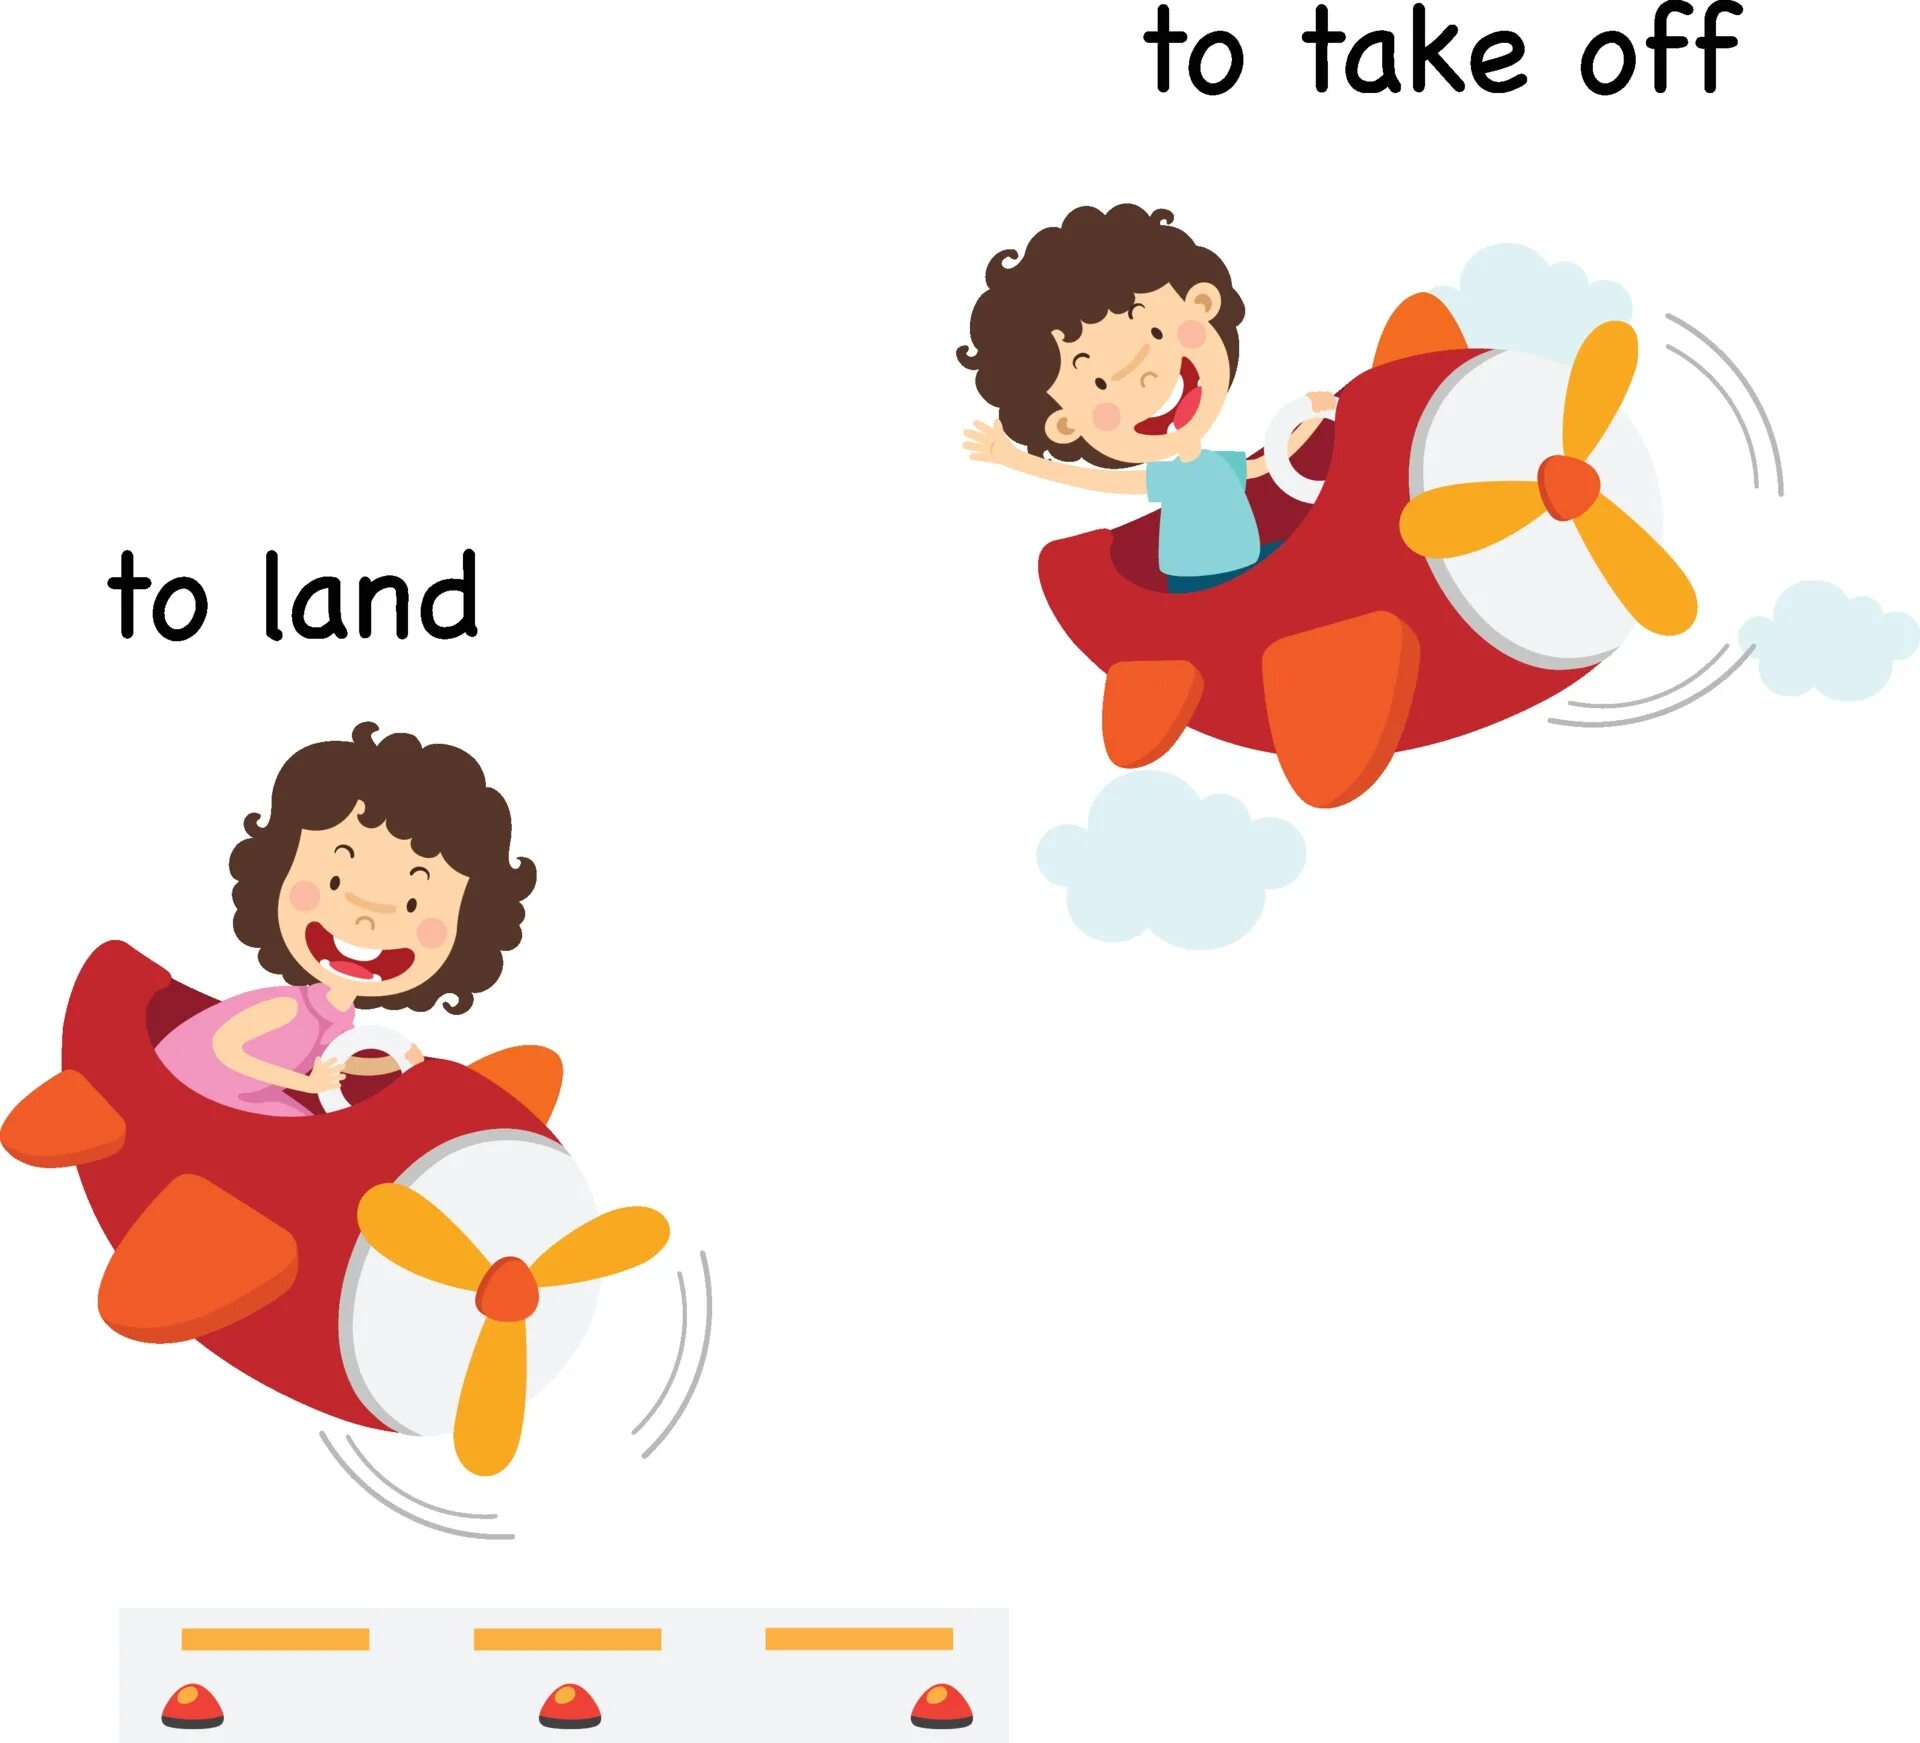 Love take off. Take off Land. To Land and to take off. Take off вектор. Take off landing.